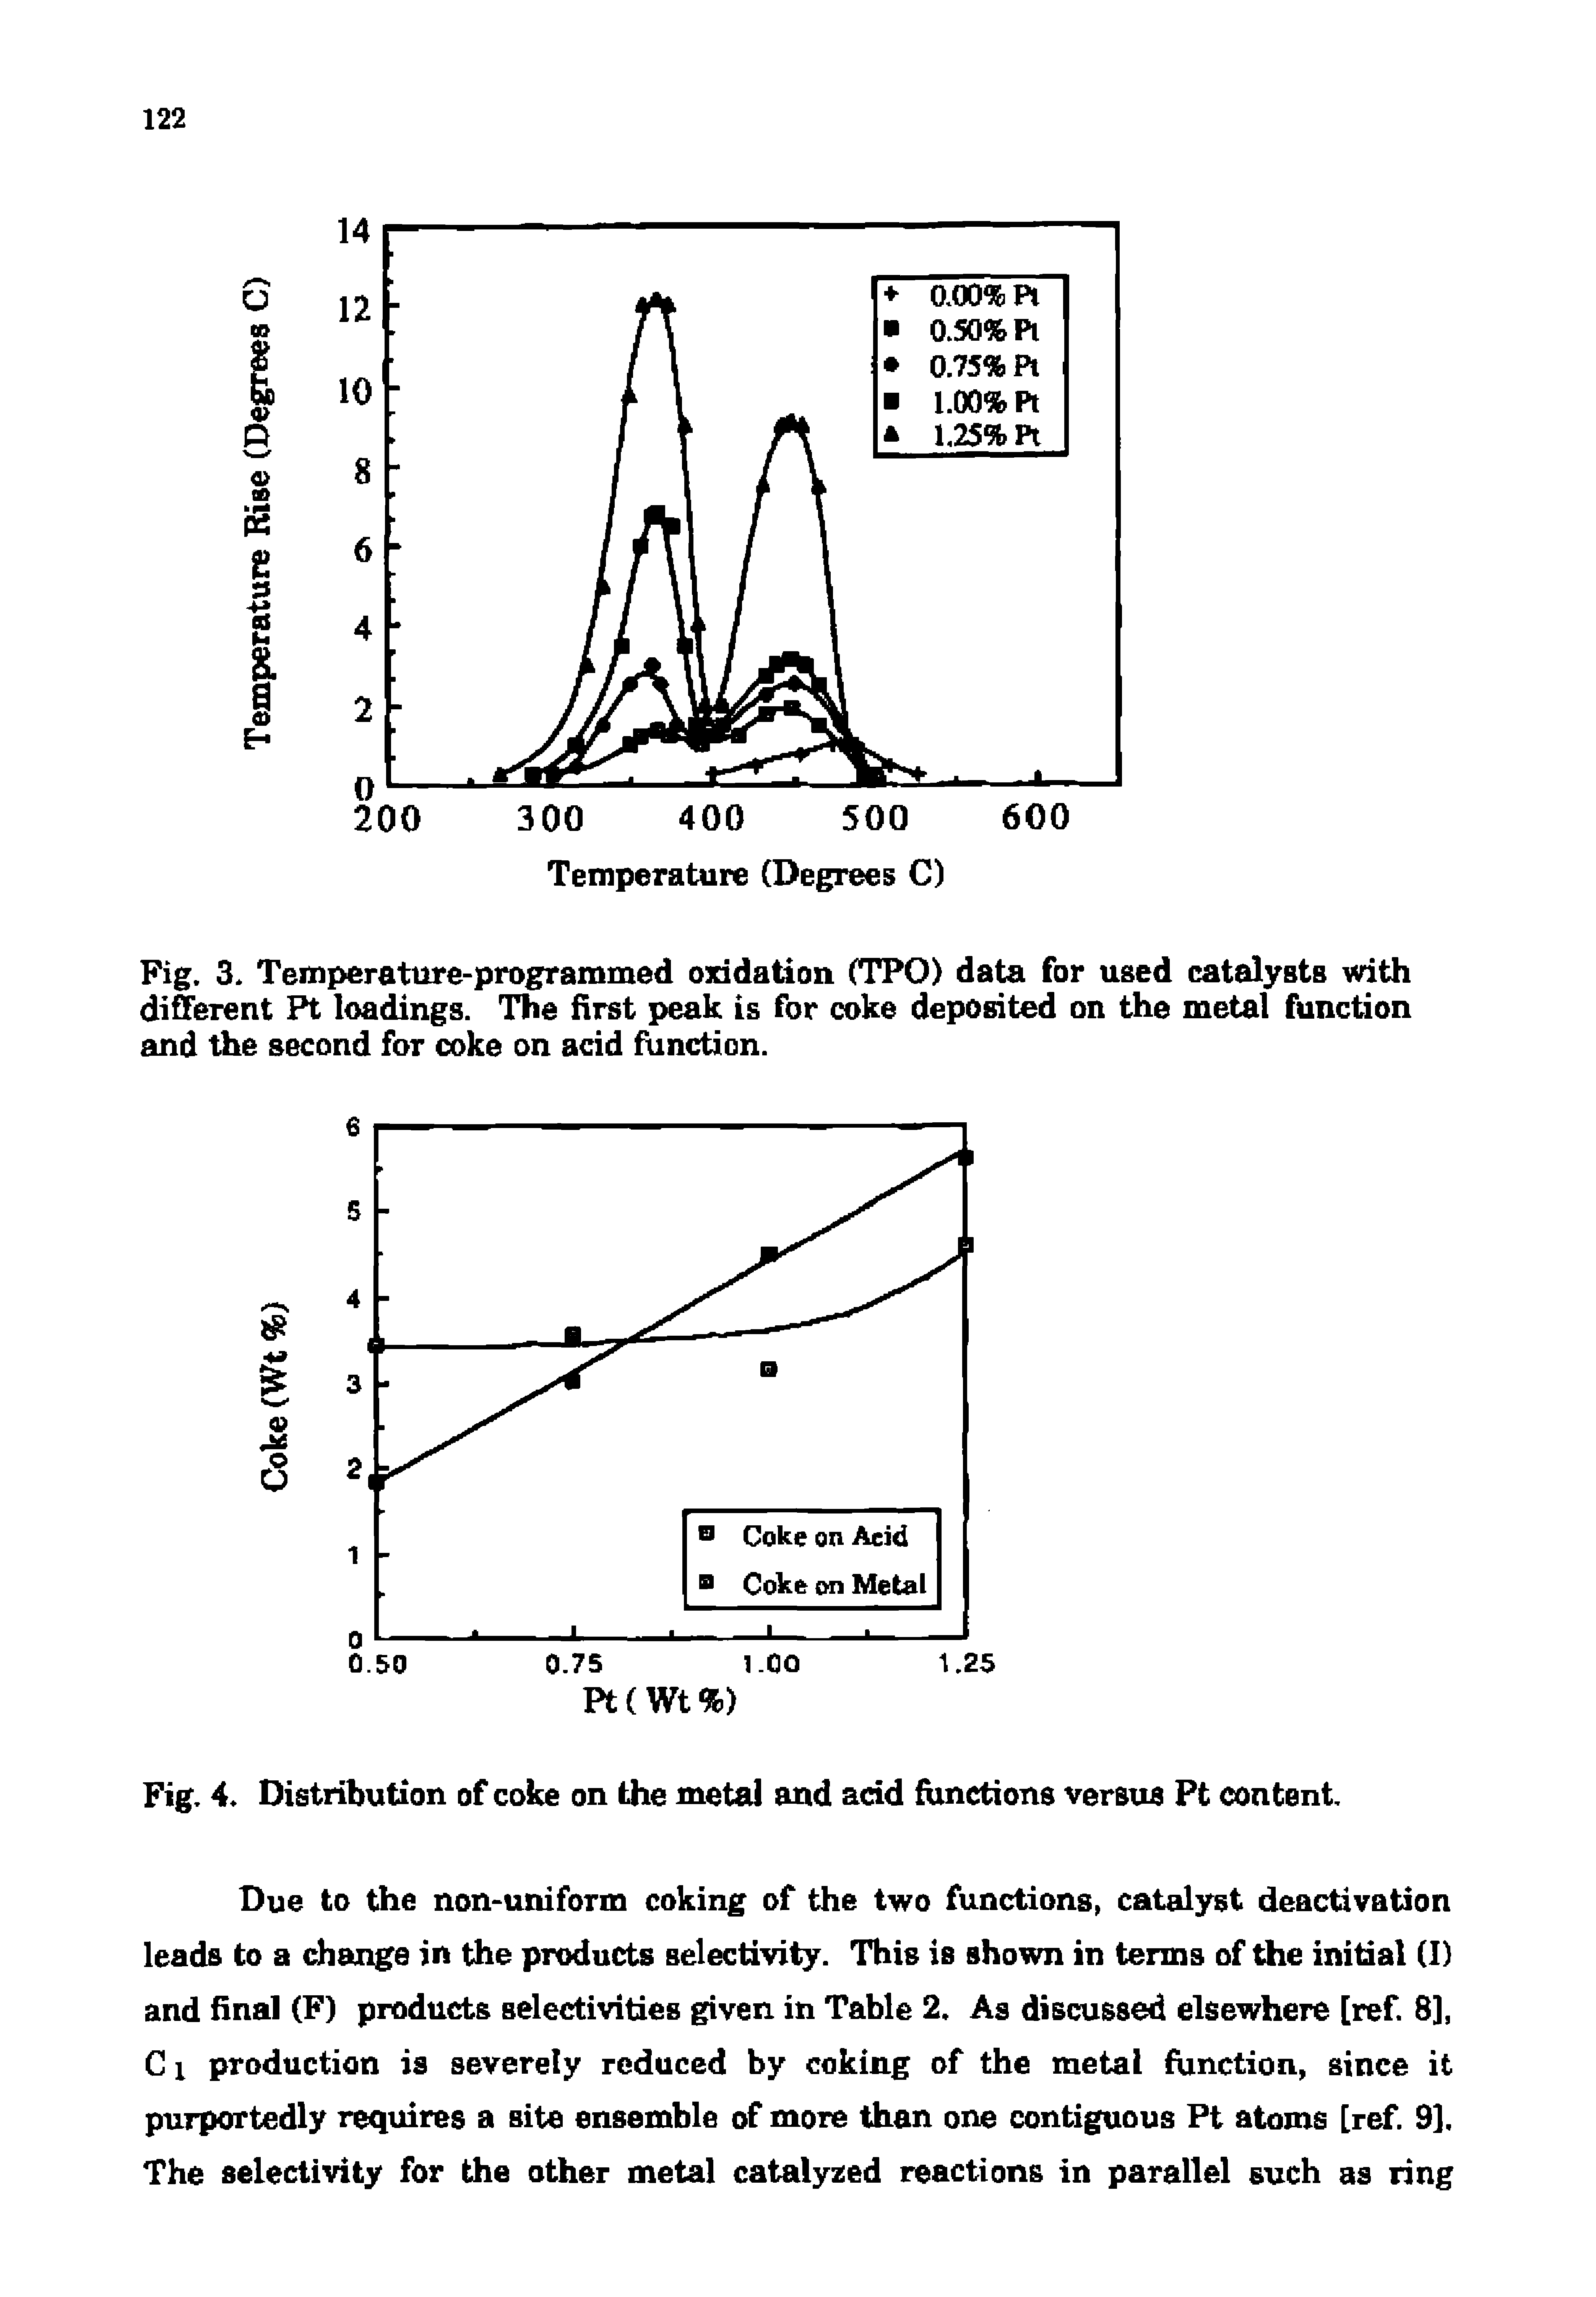 Fig. 3. Temperature-programmed oxidation (TPO) data for used catalysts with different Pt loadings. The first peak is for coke deposited on the metal function and the second for coke on acid function.